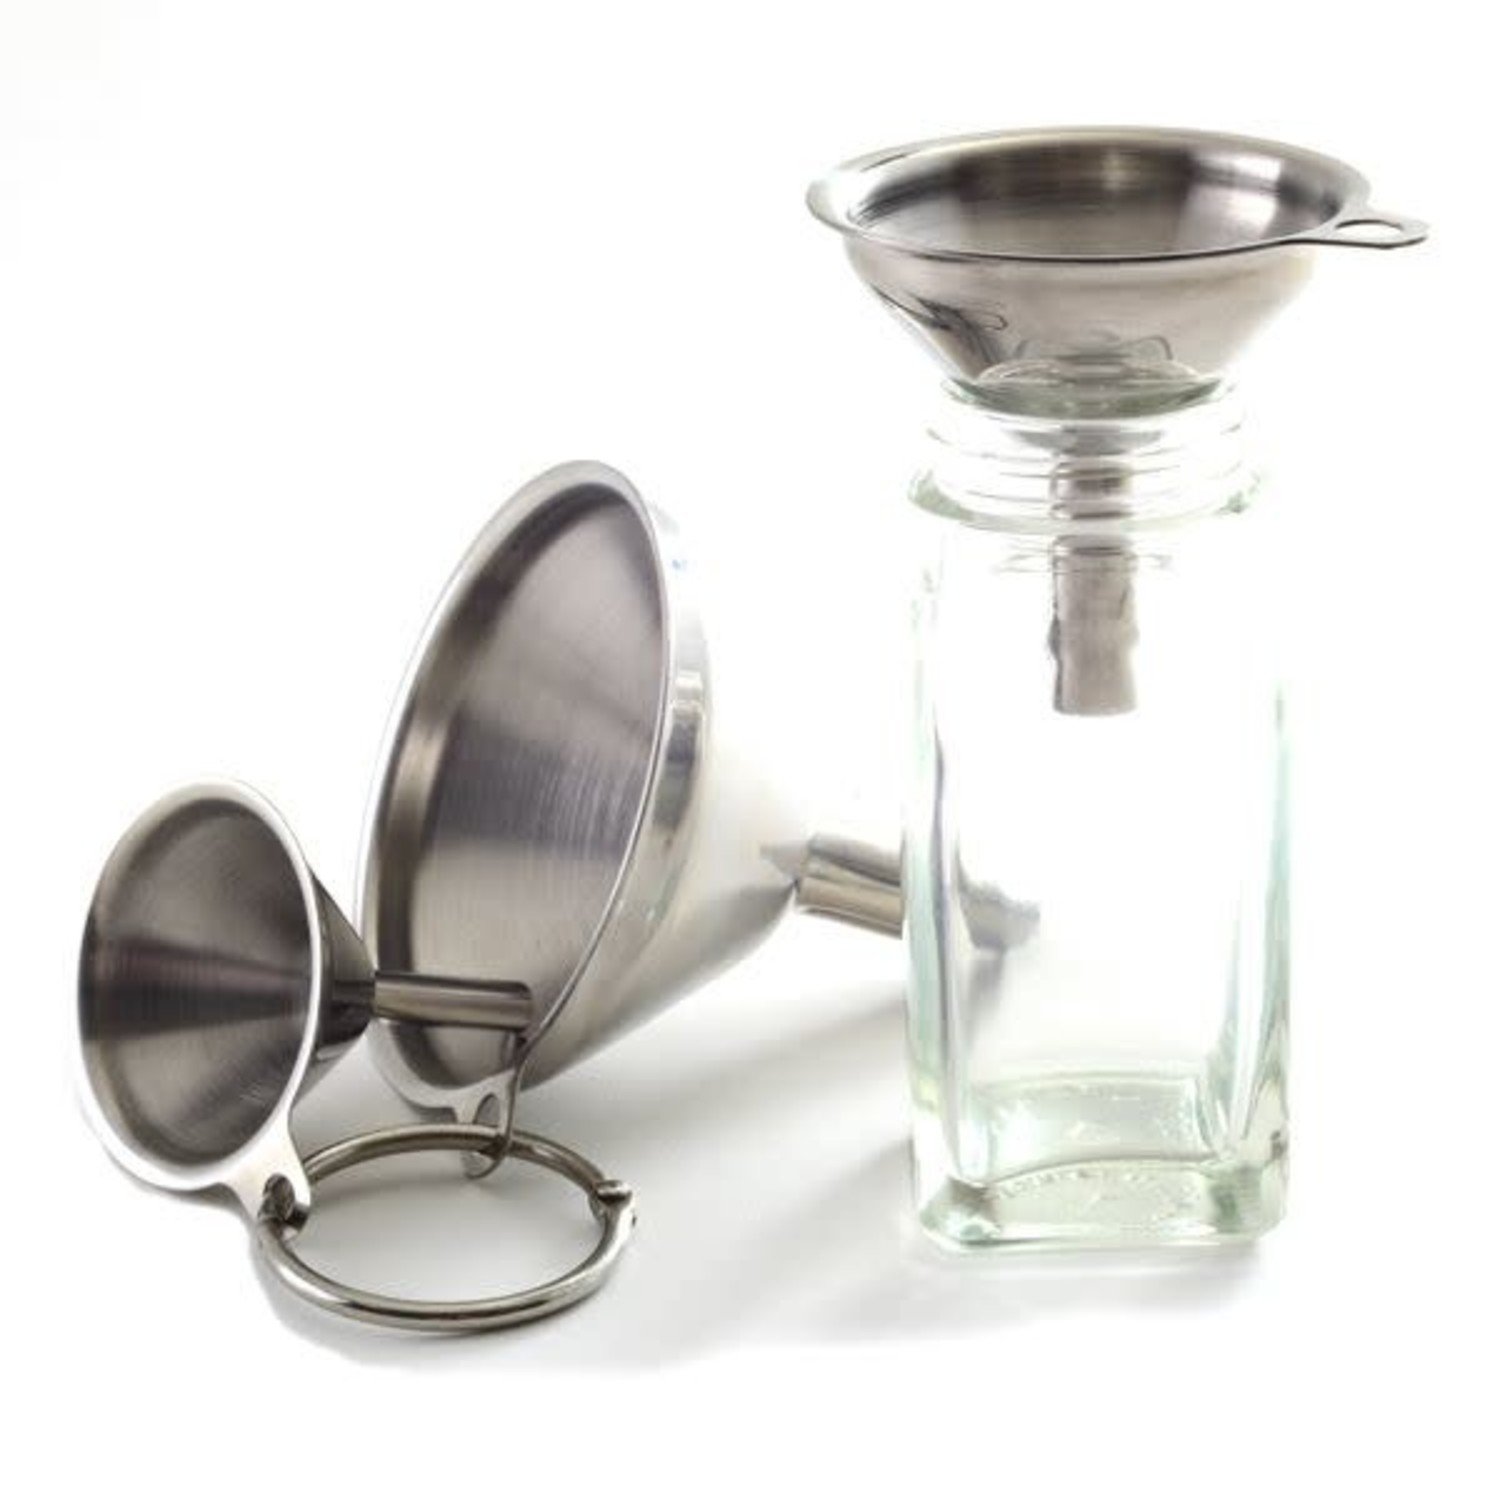 Stainless Steel Funnel Set - The Birch Store